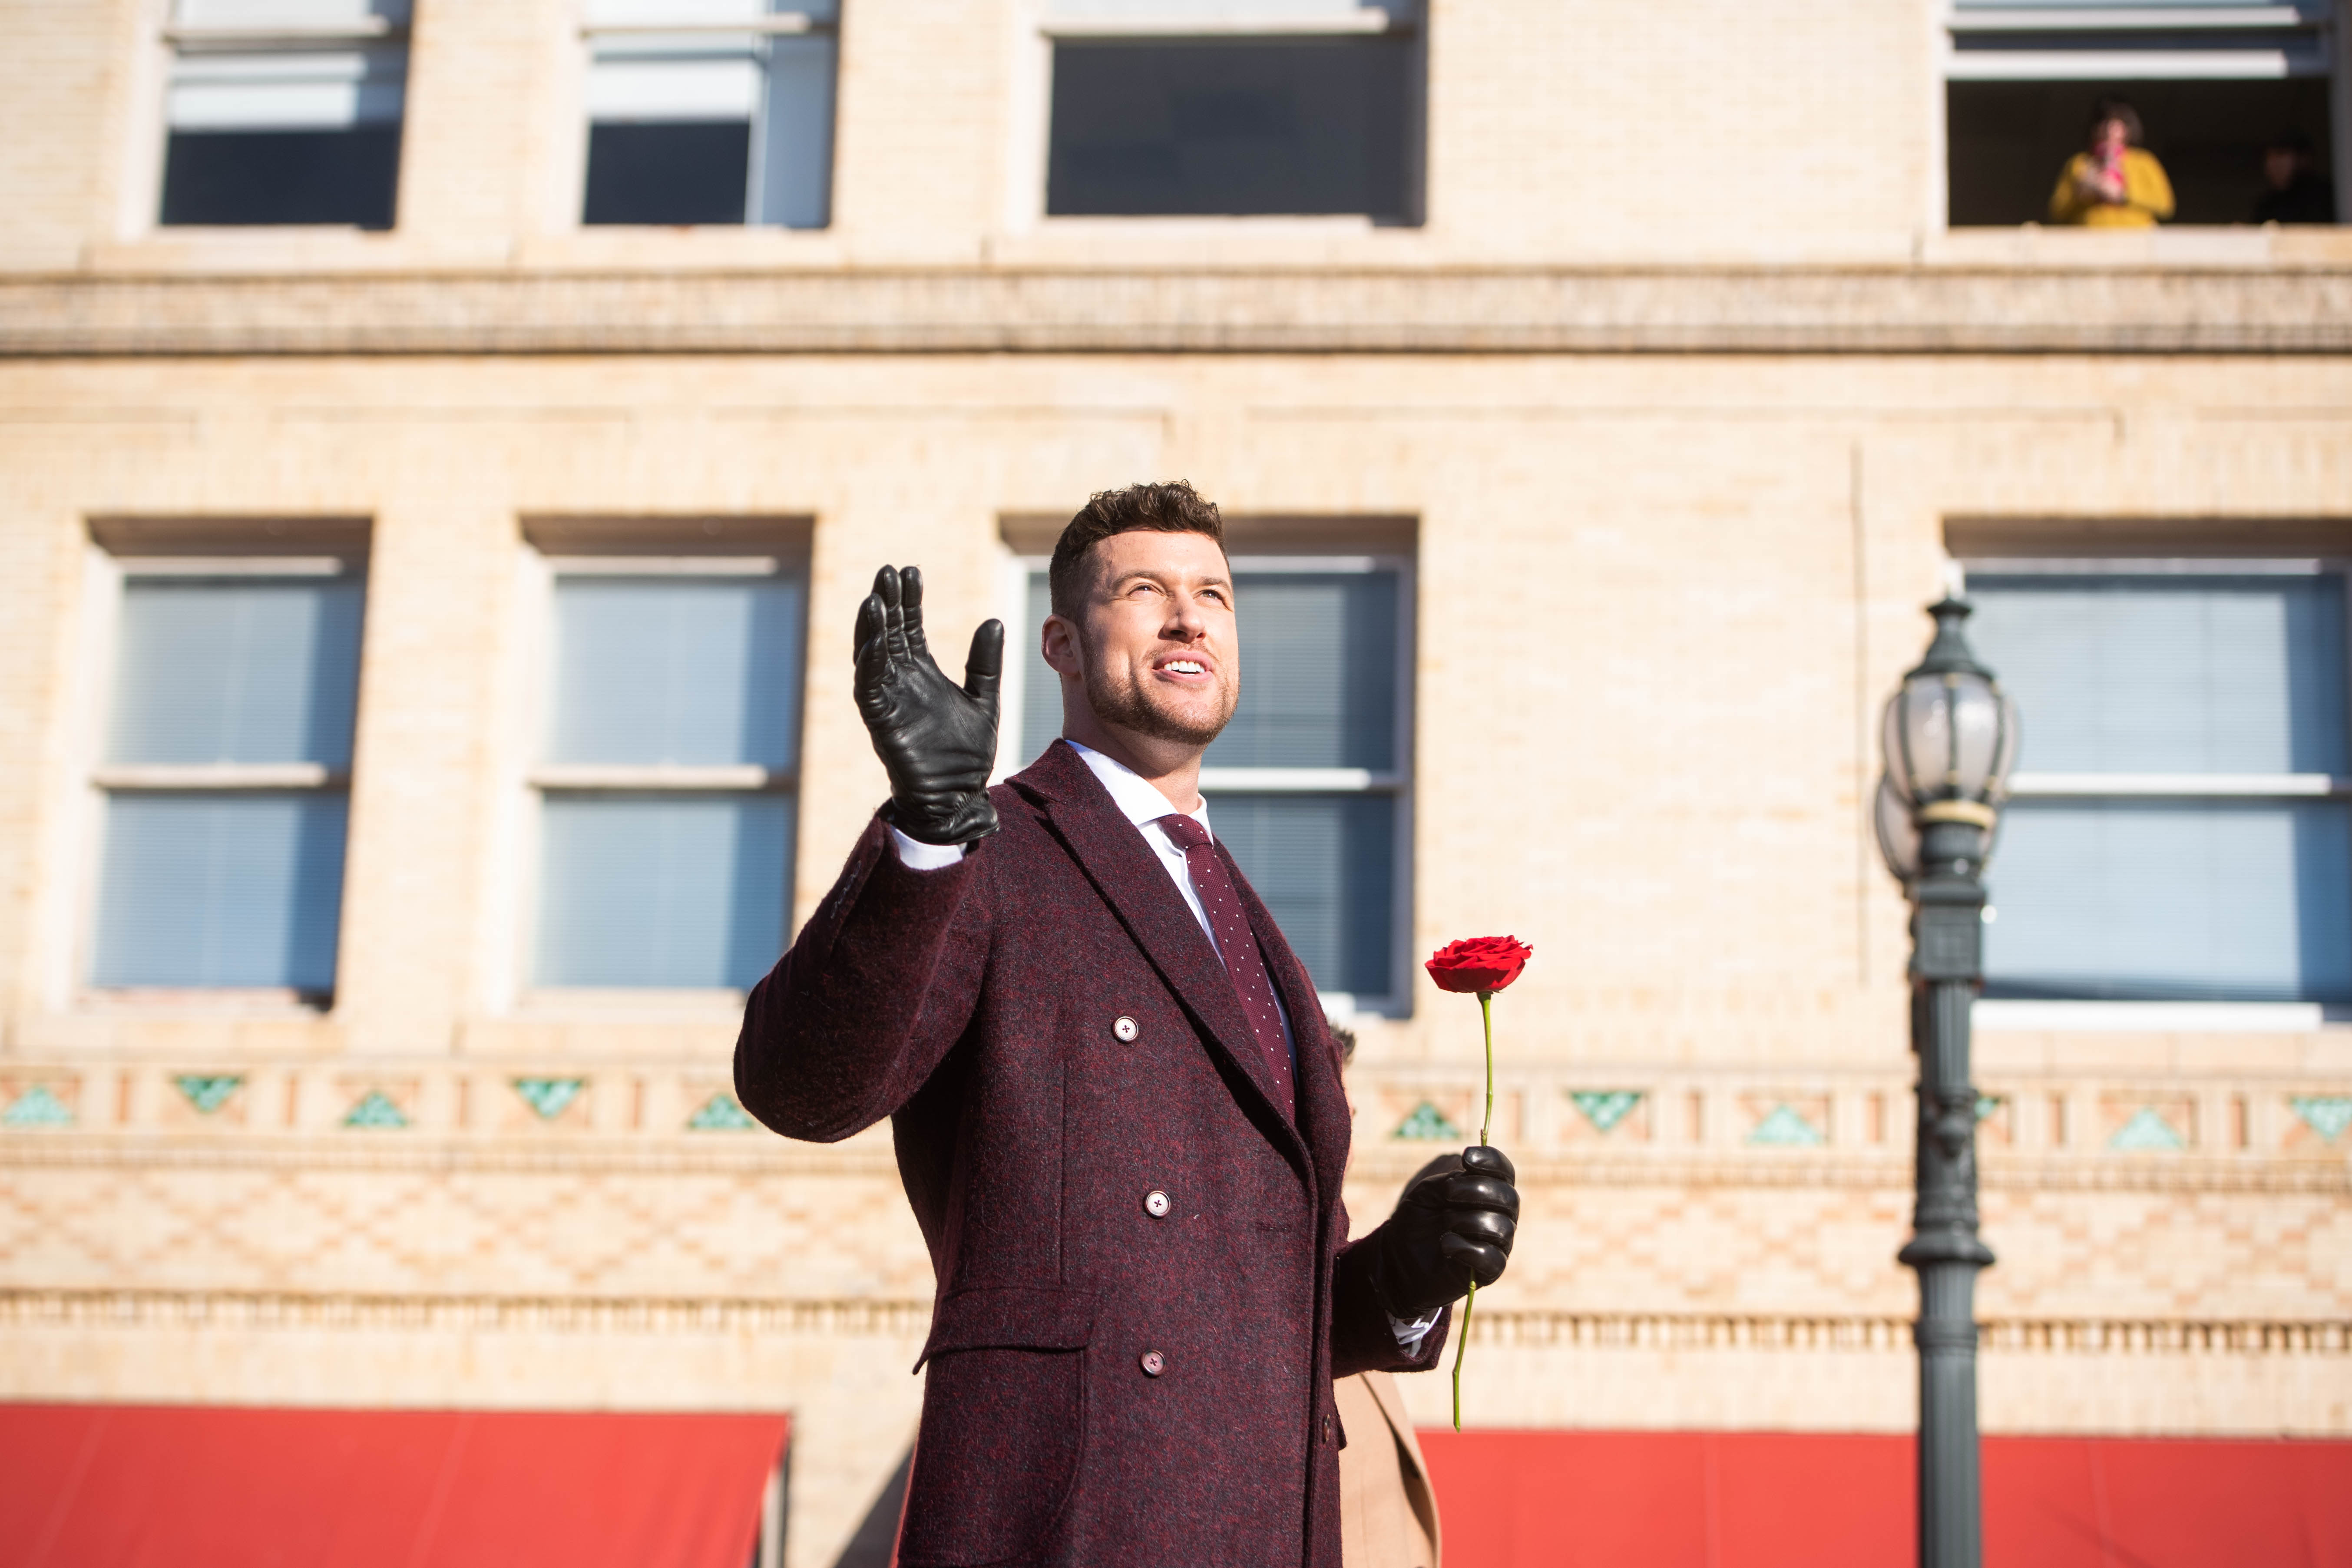 'The Bachelor' star Clayton Echard waves holding a rose